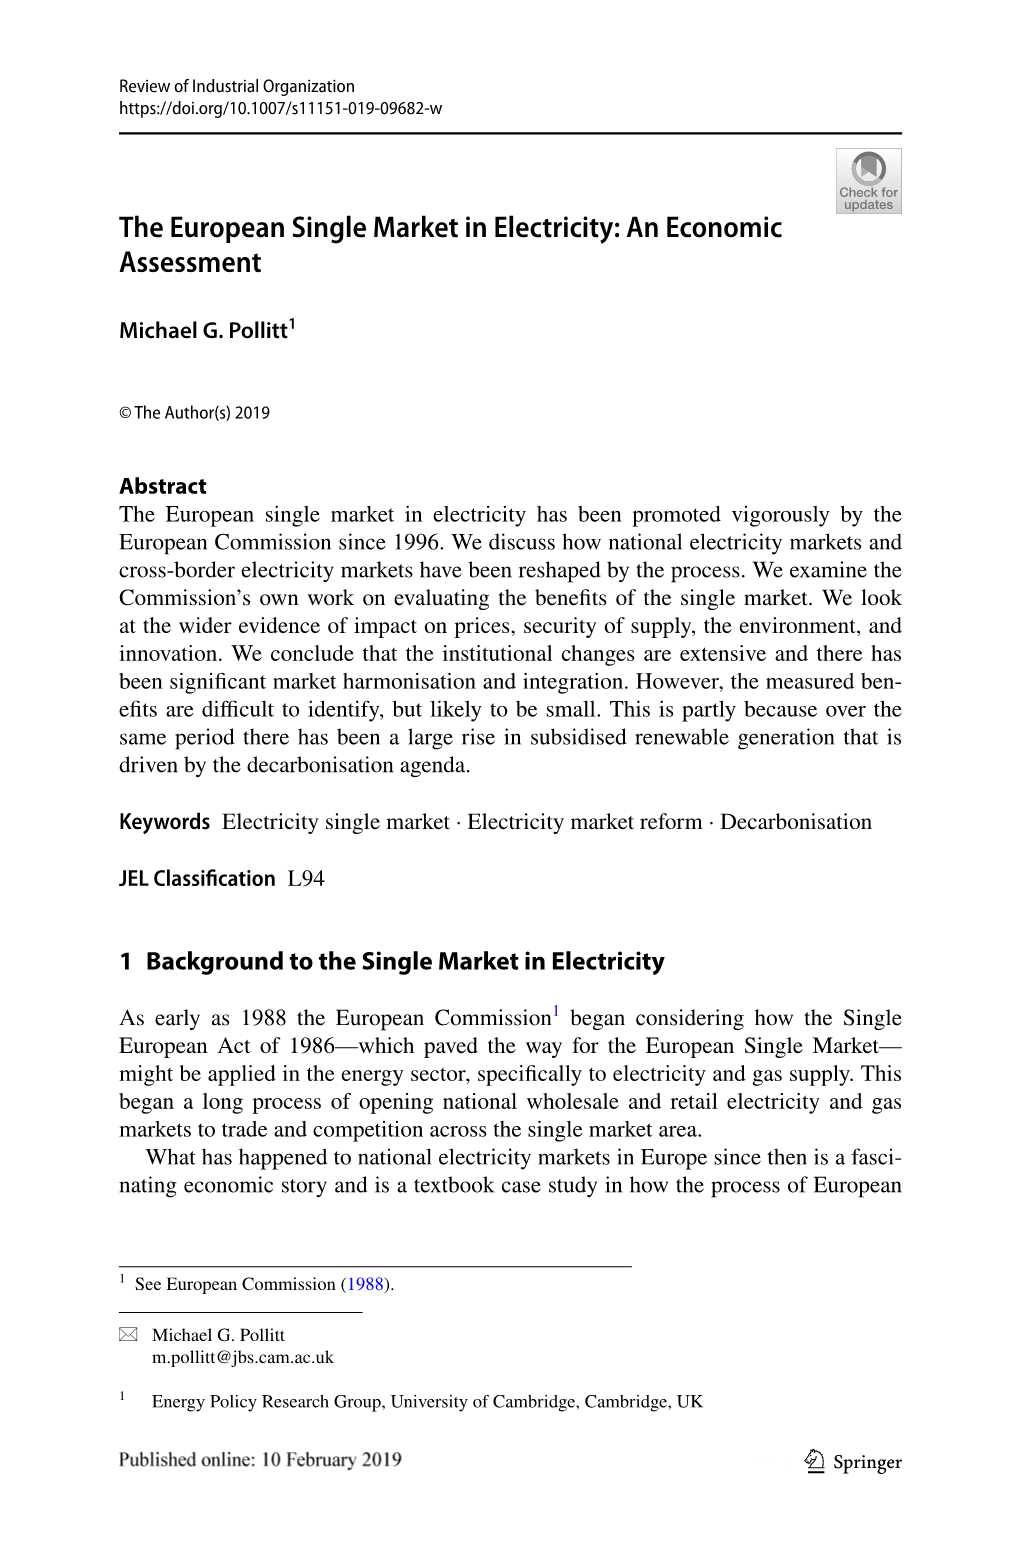 The European Single Market in Electricity: an Economic Assessment